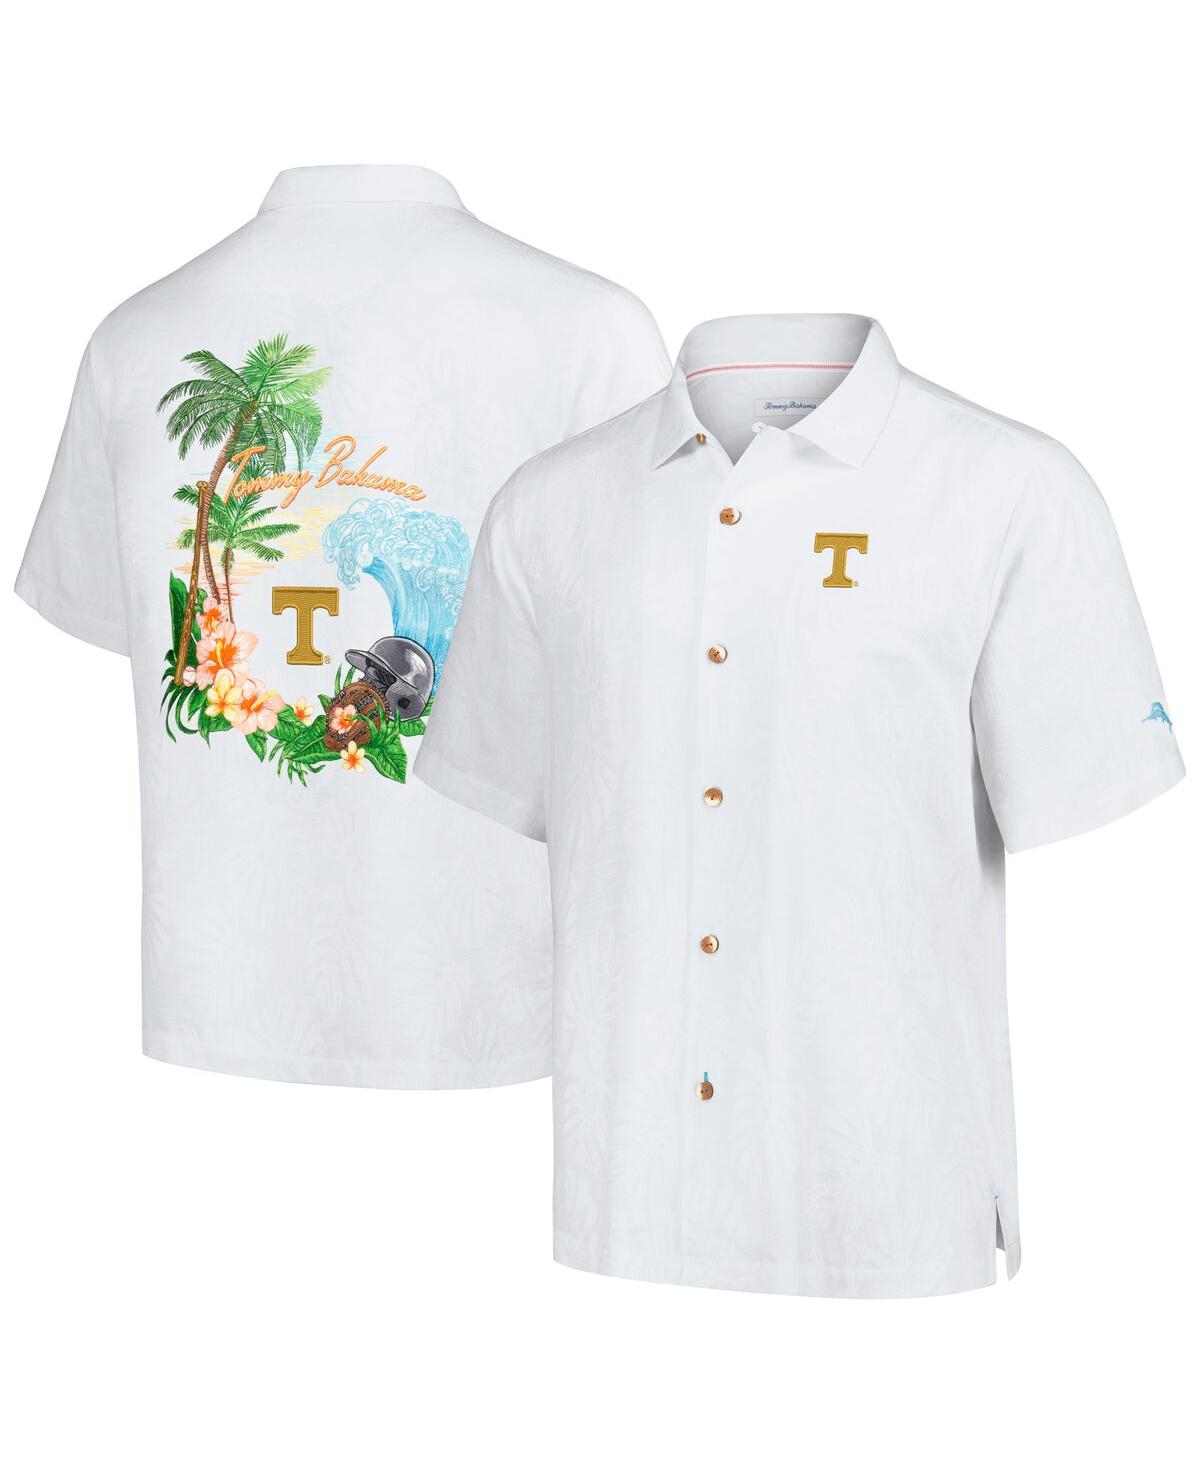 Men's White Tennessee Volunteers Castaway Game Camp Button-Up Shirt - White